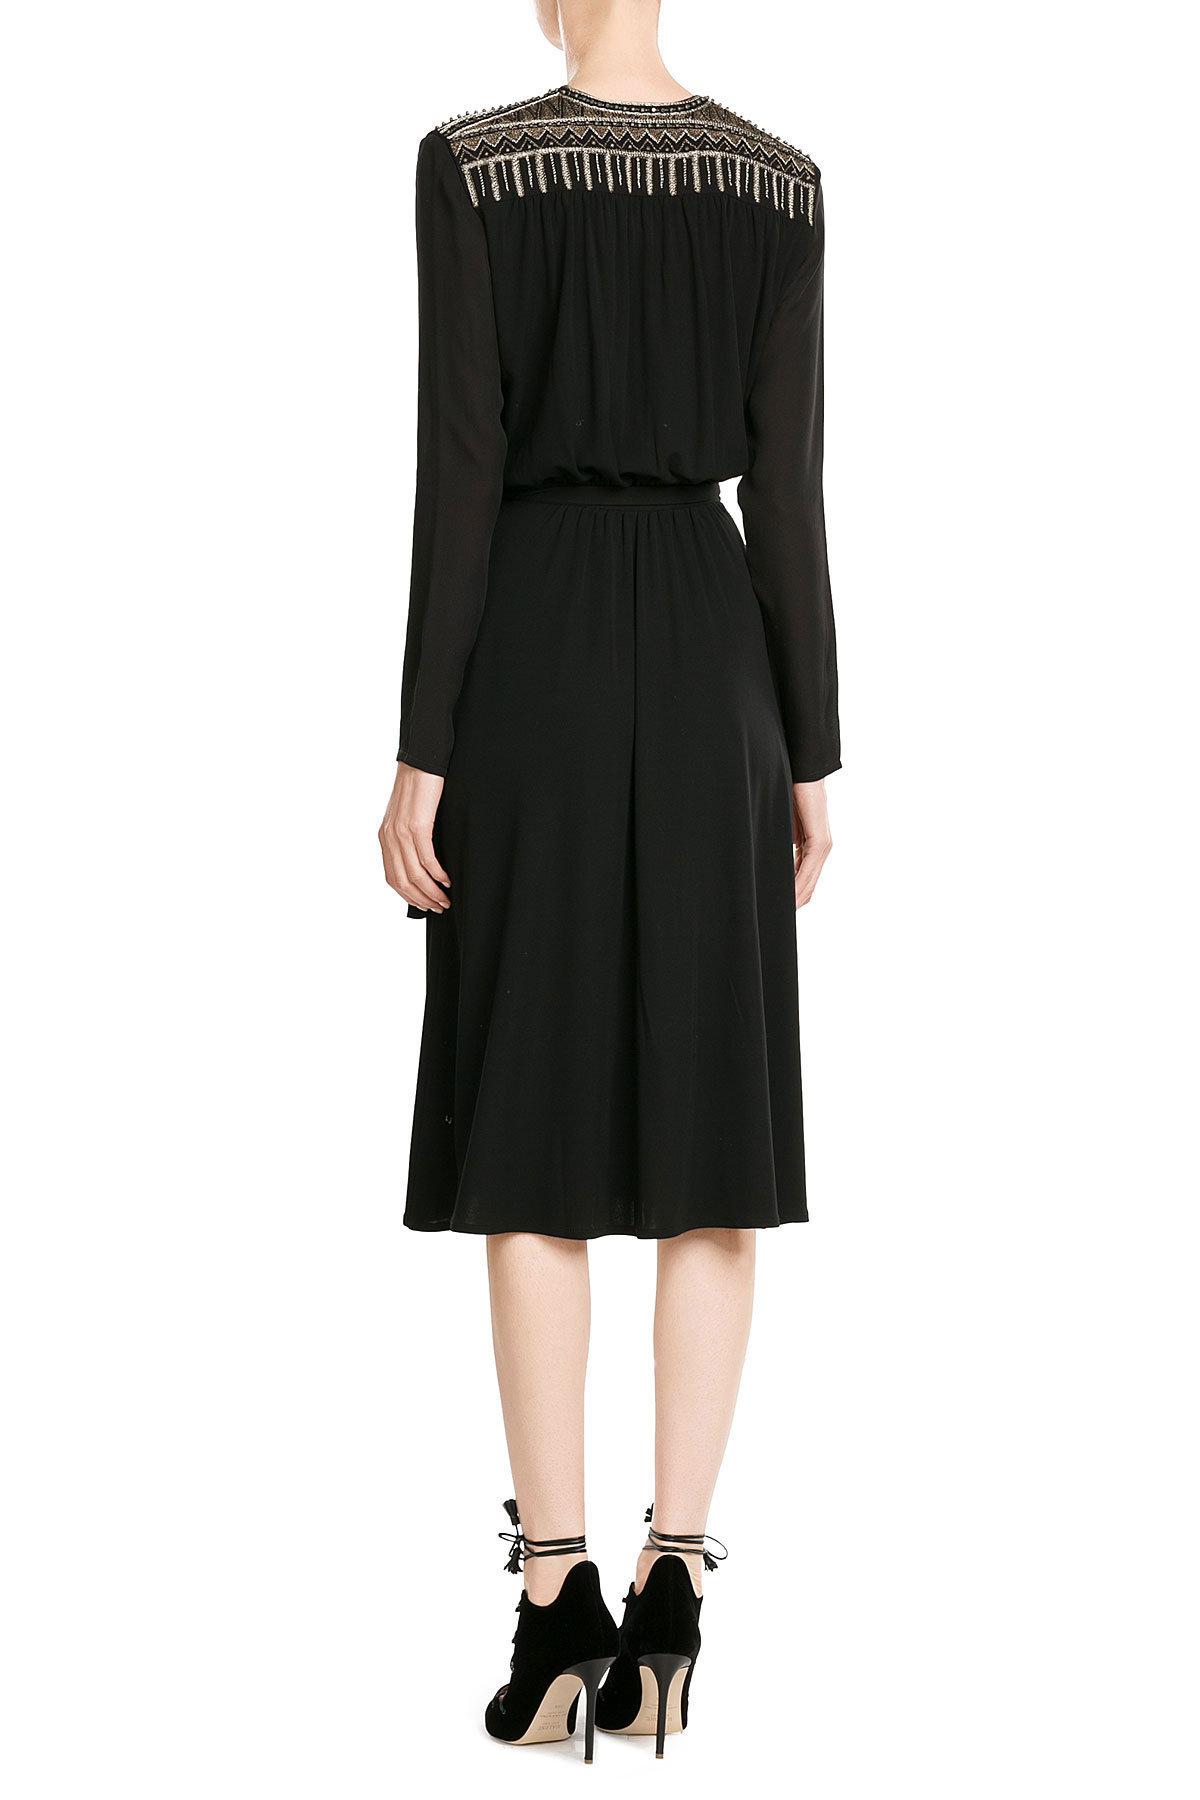 Lyst - Etro Wrap Dress With Embroidered And Embellished Detail in Black